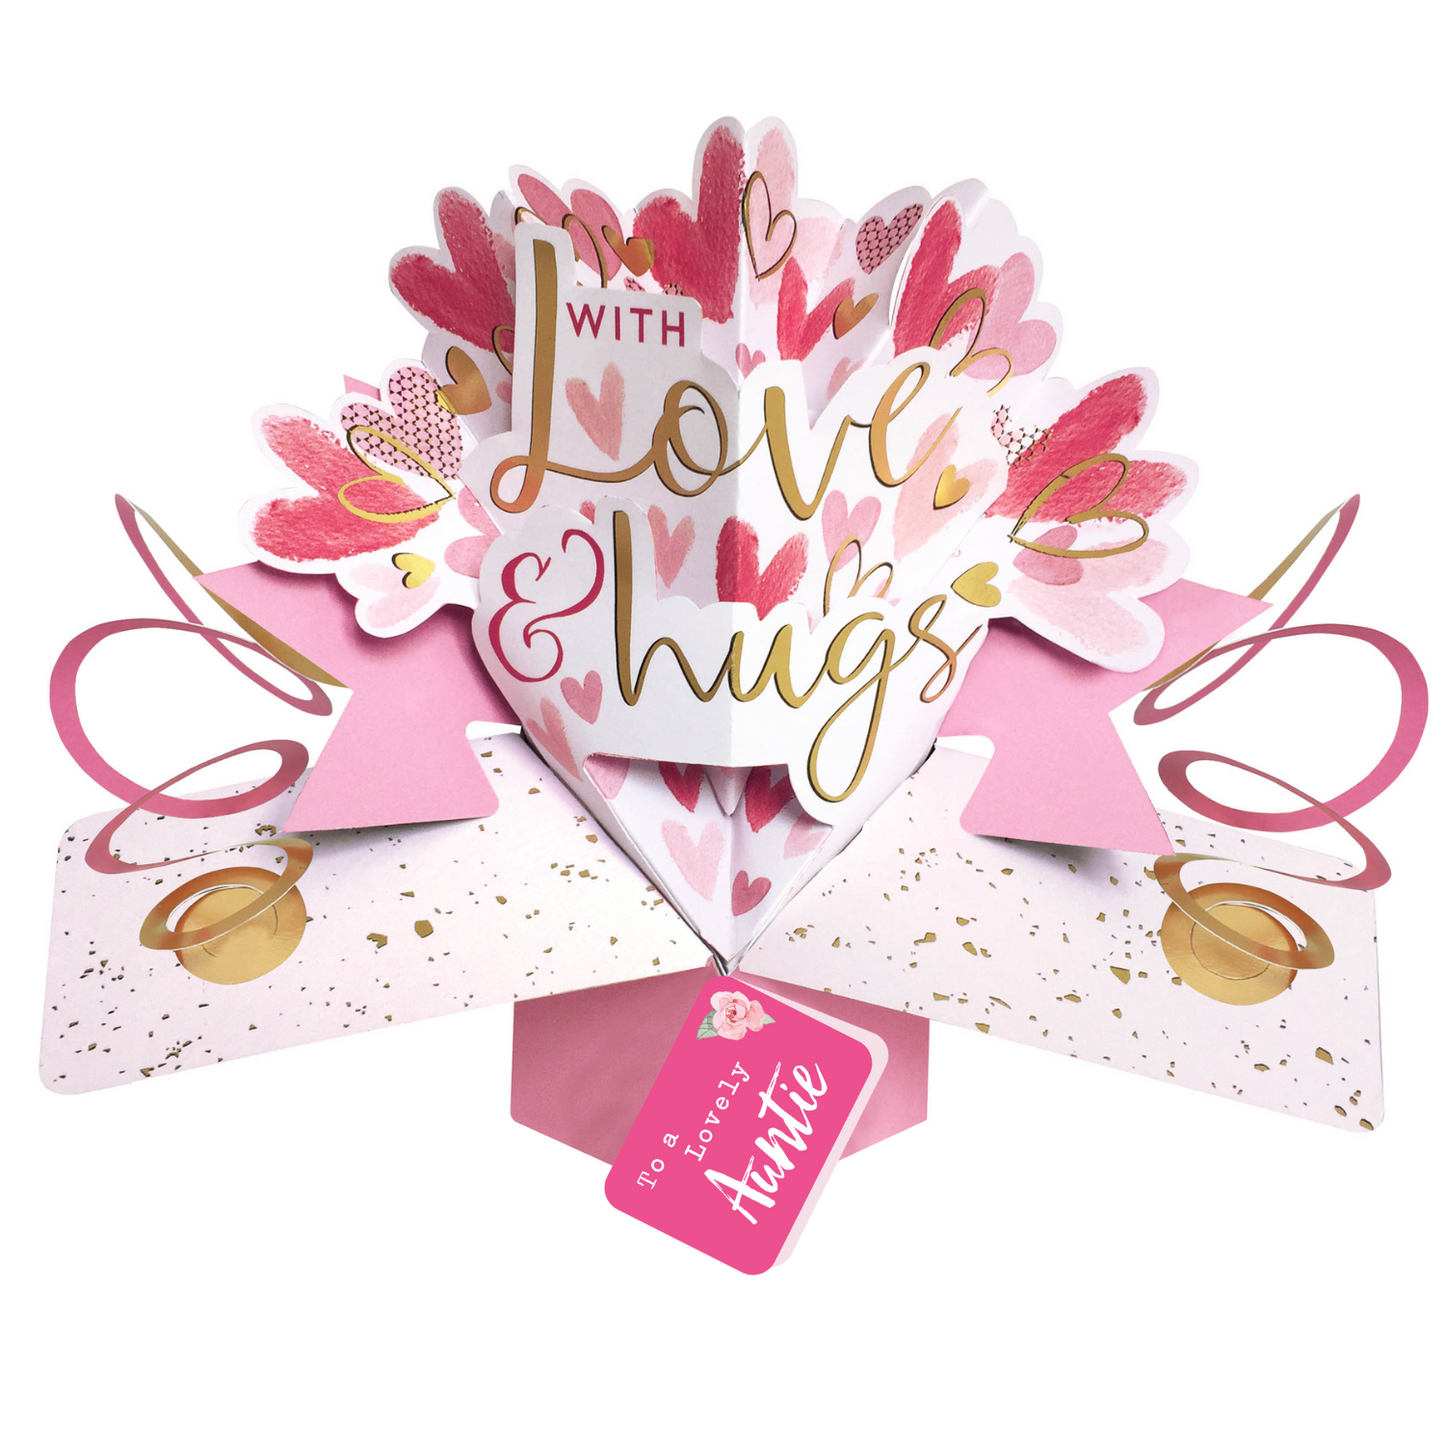 Lovely Auntie With Love & Hugs Pop Up Card